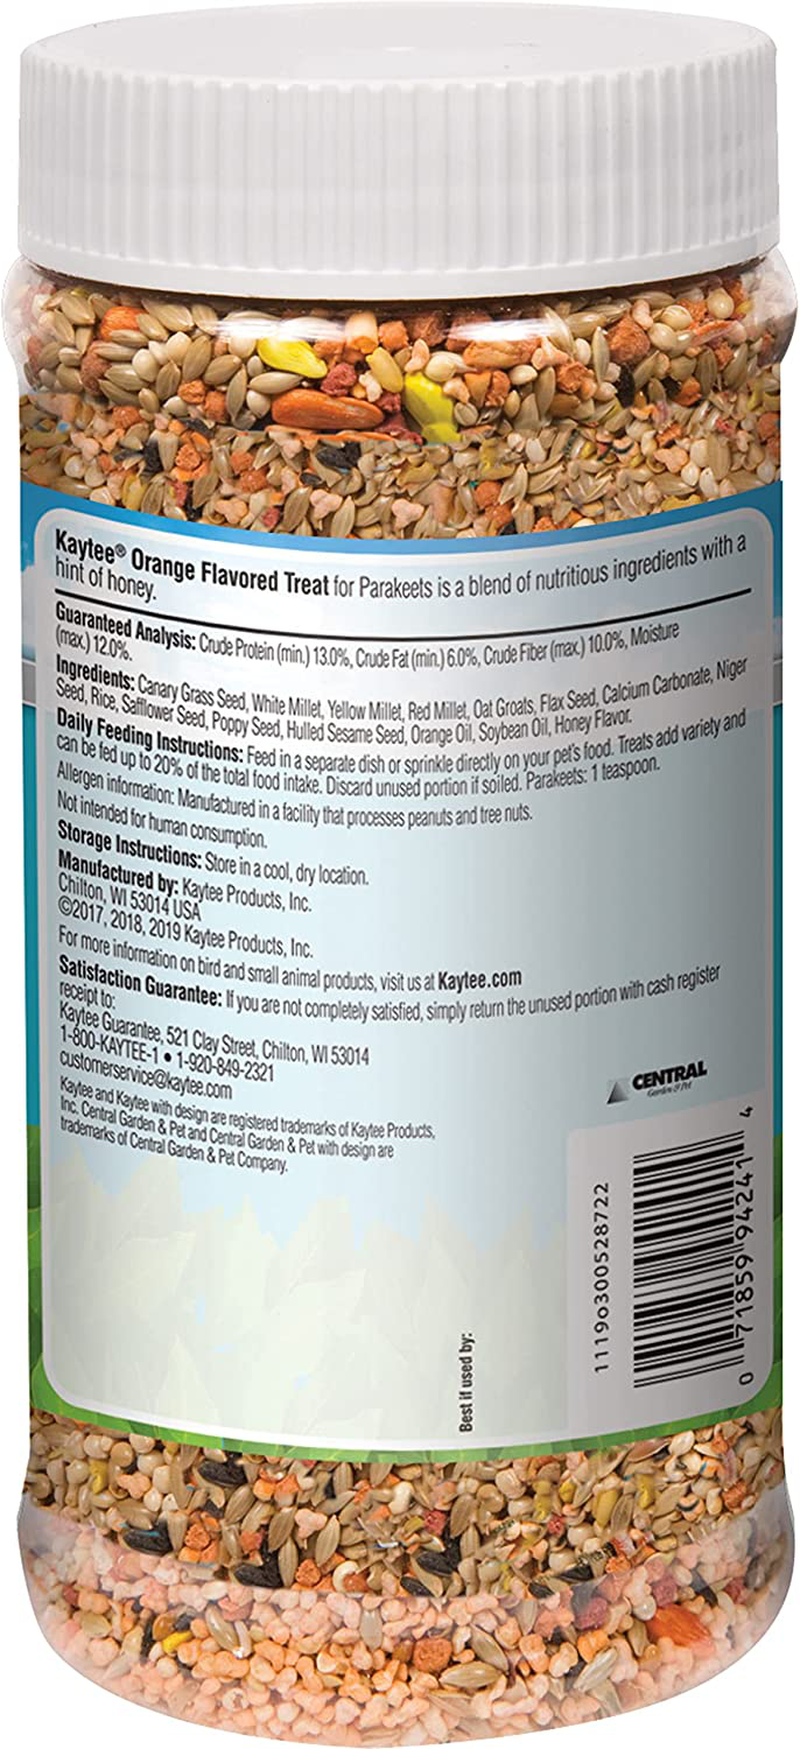 Kaytee Forti Diet Pro Health Orange Flavored Bird Treats for Parakeets, 10-Ounce